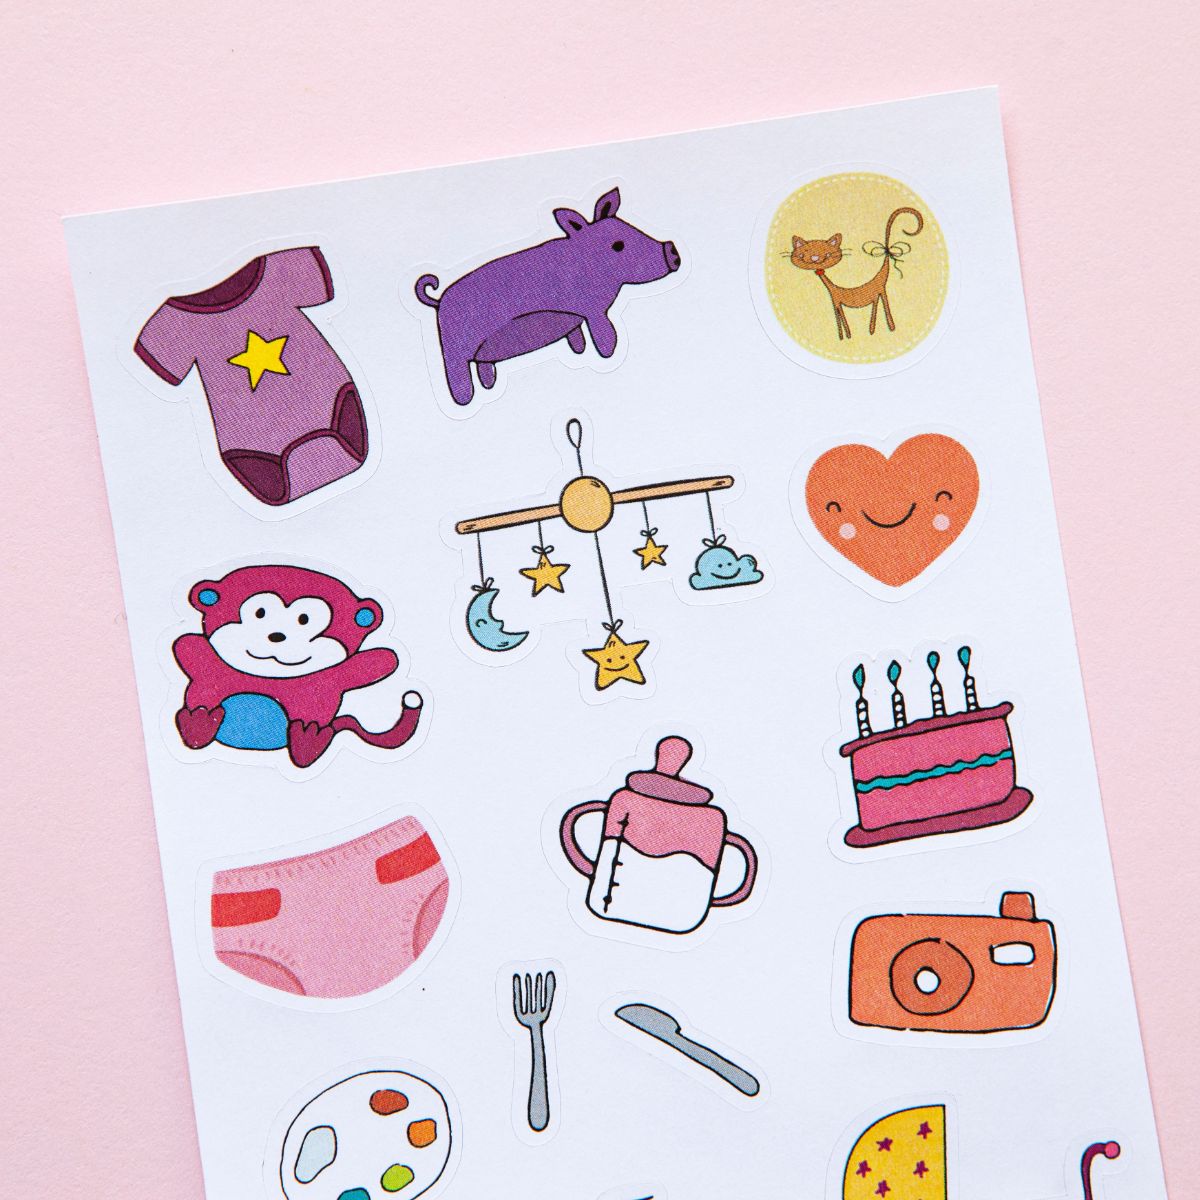 Cute Baby Girl Gems Stickers #8678 :: Baby Stickers :: Scrapbooking Stickers  :: Stickers 'N' Fun